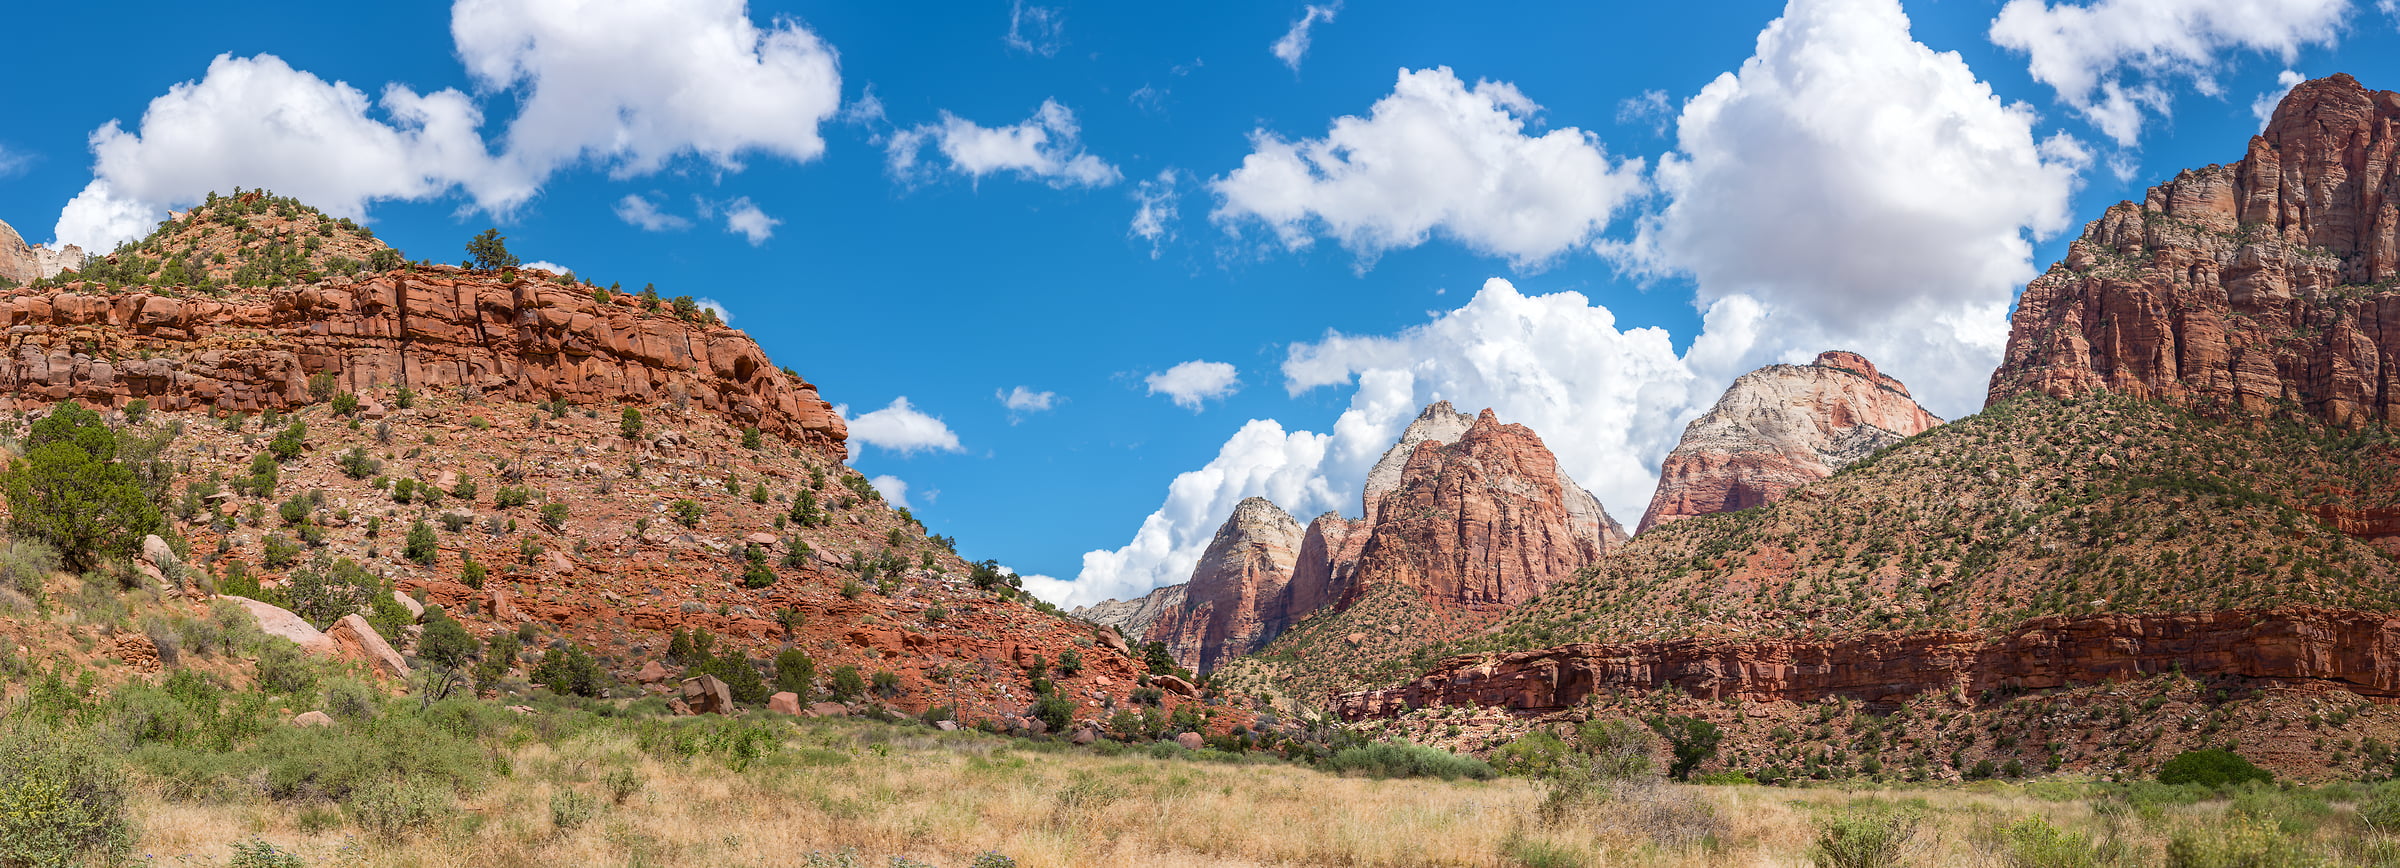 334 megapixels! A very high resolution, large-format VAST photo print from the Zion Human History Museum; landscape photograph created by Jim Tarpo in Human History Museum, Zion National Park, Utah